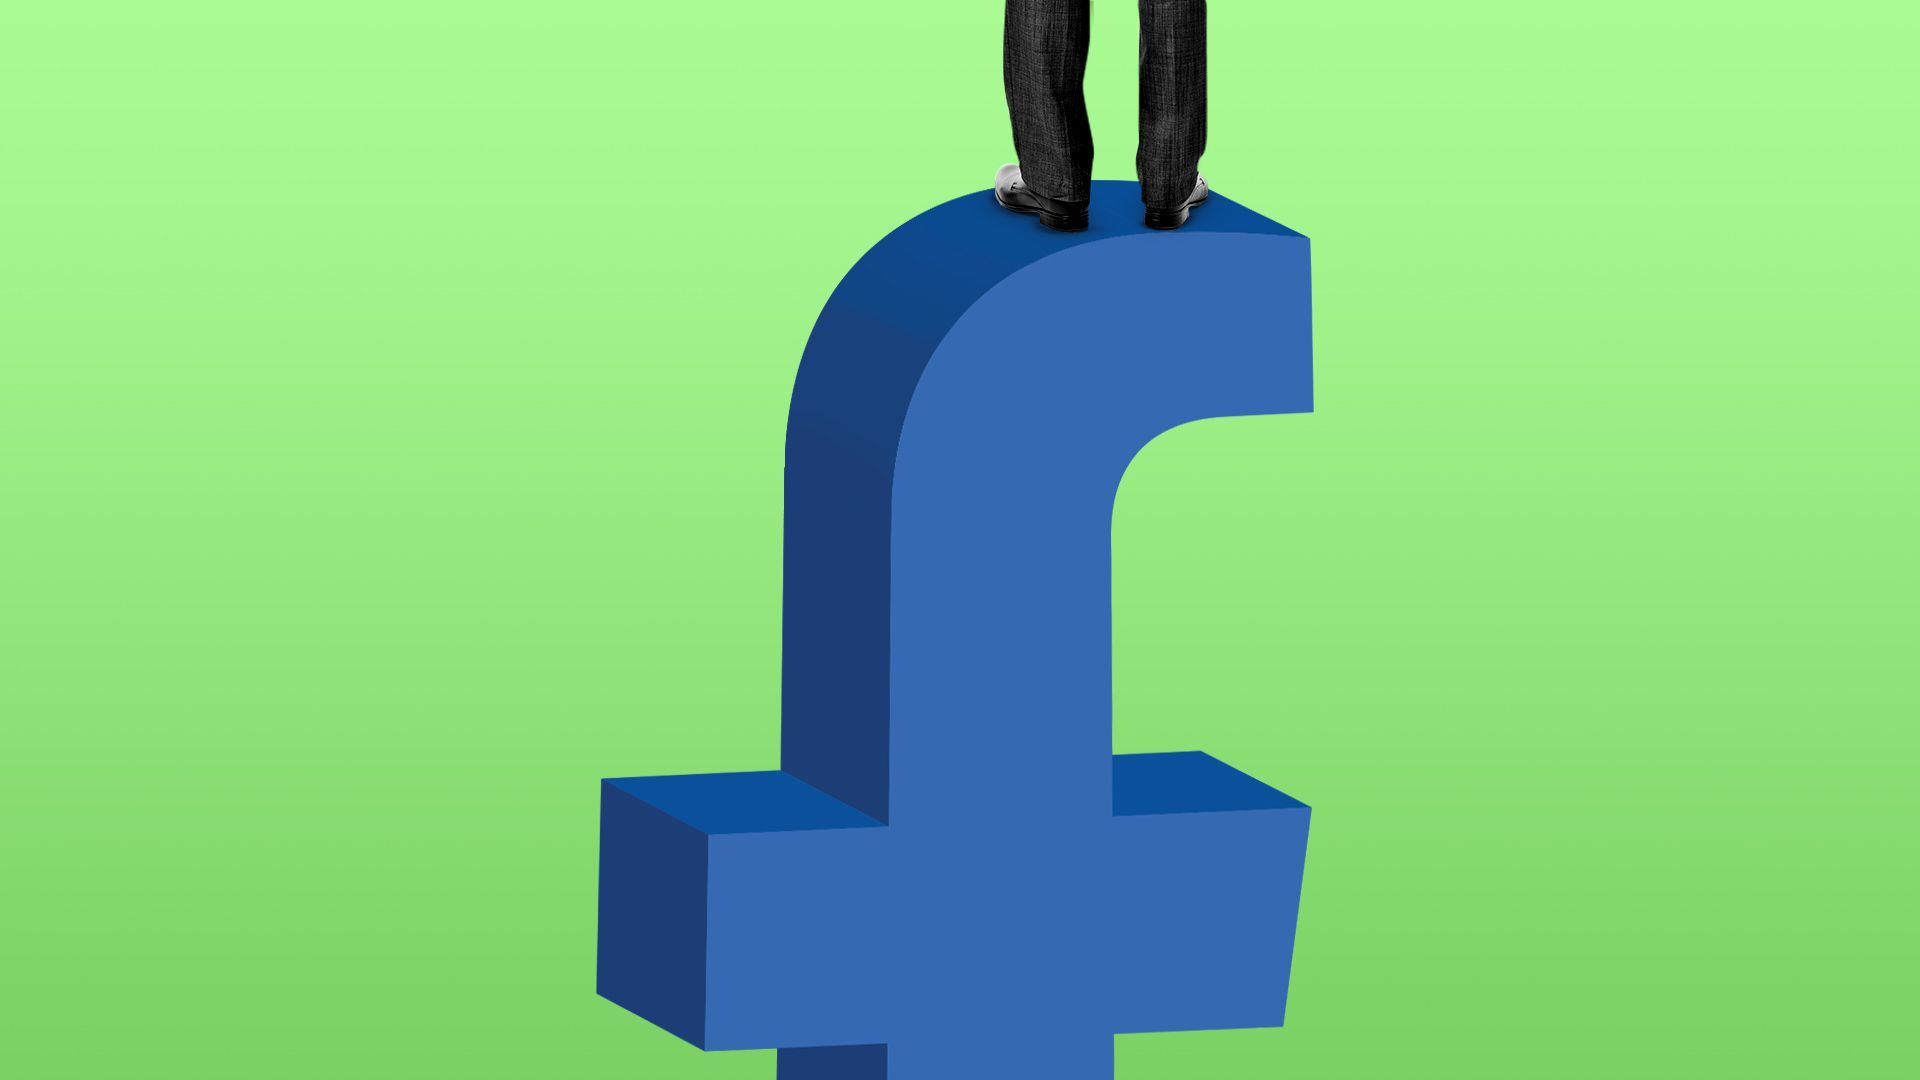 Illustration of Biden standing on top of the Facebook "f". 